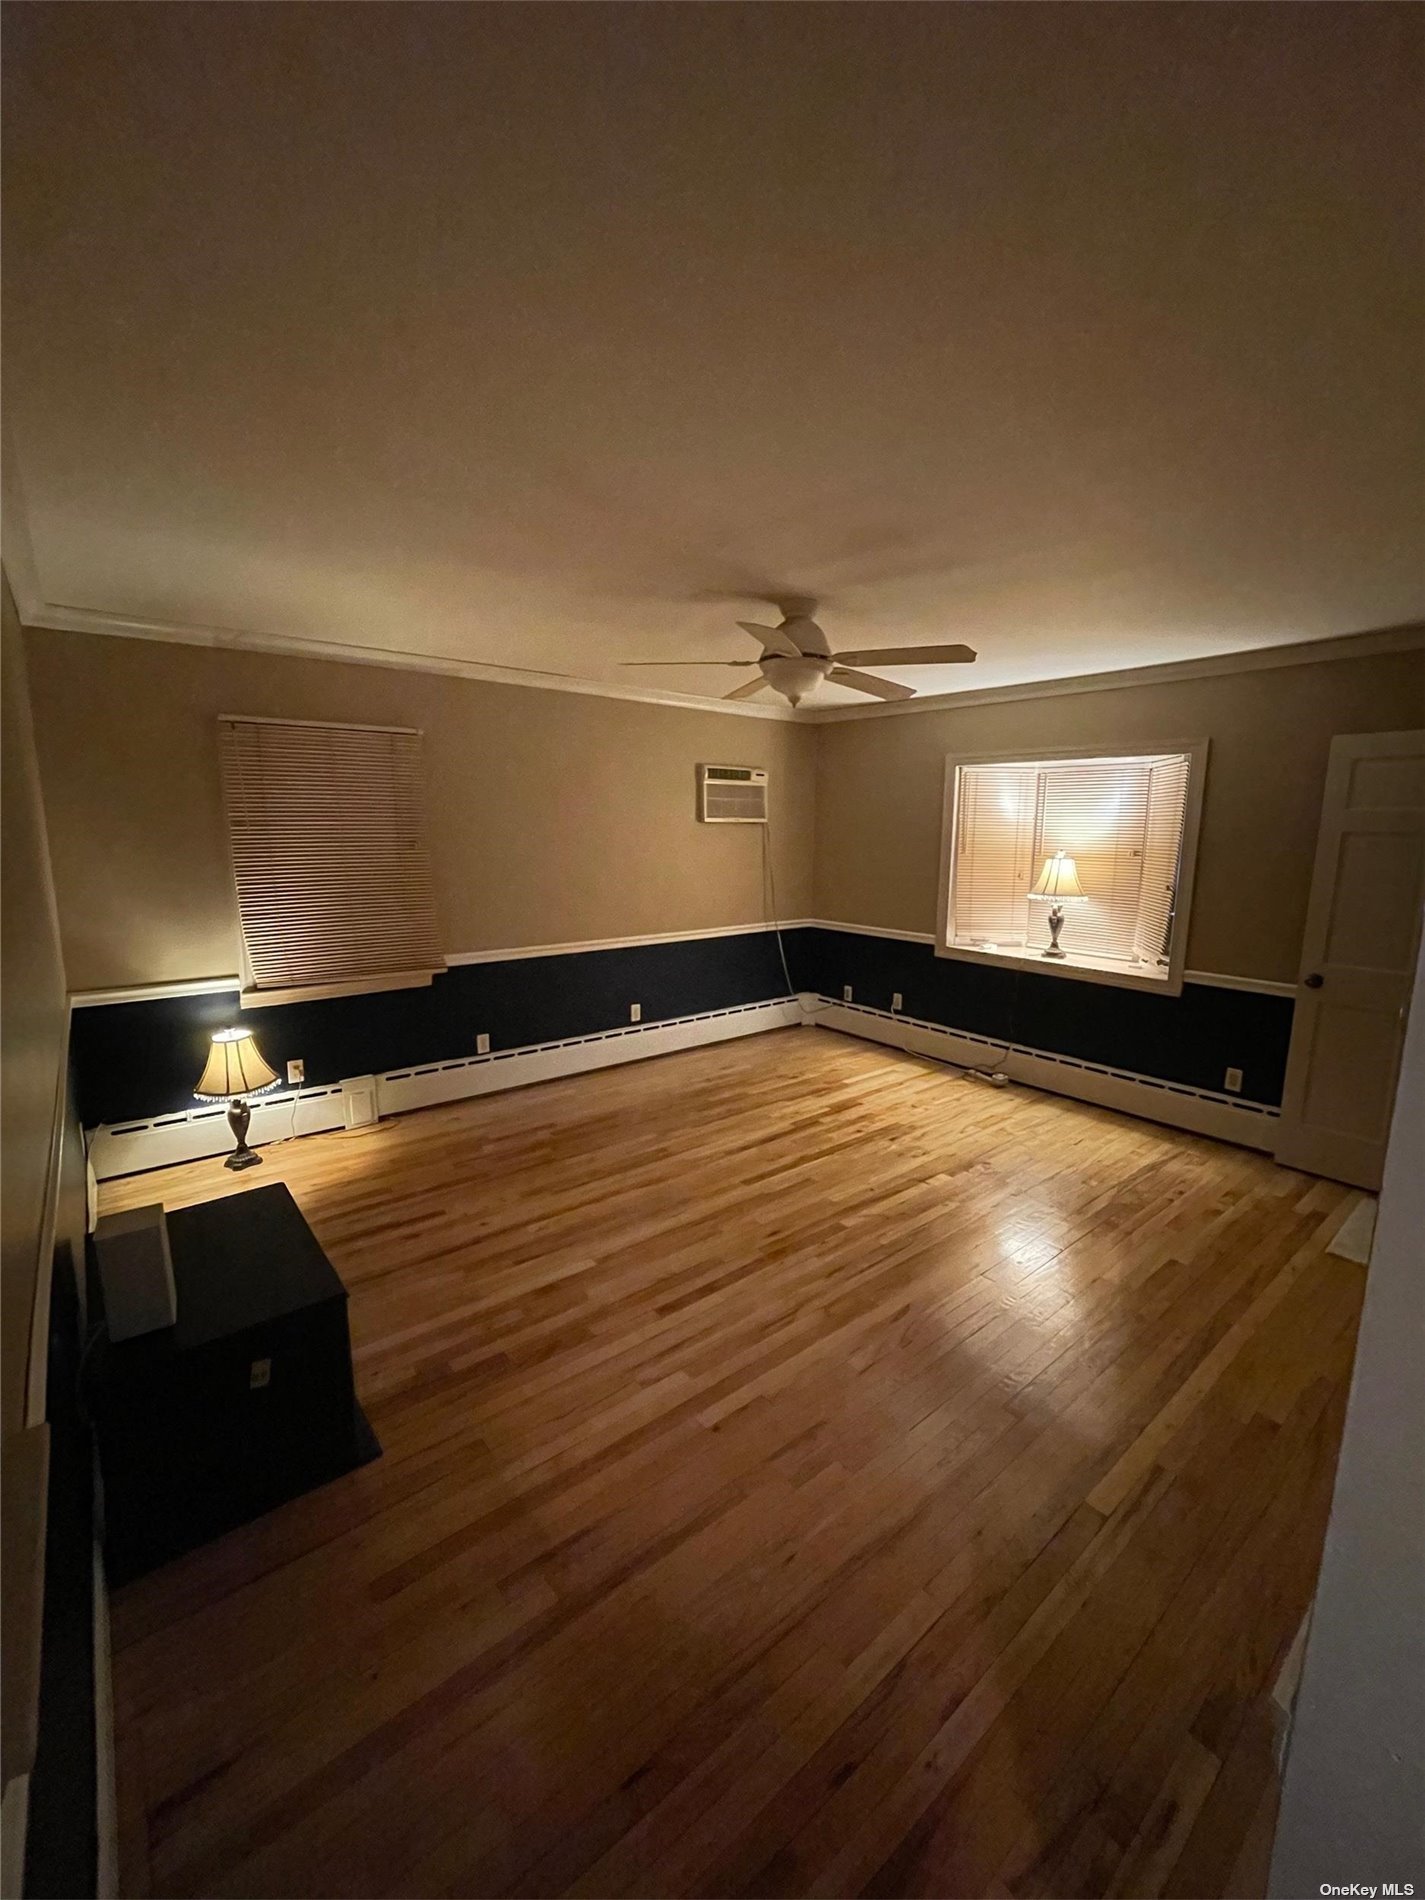 a view of a room with an empty space and wooden floor